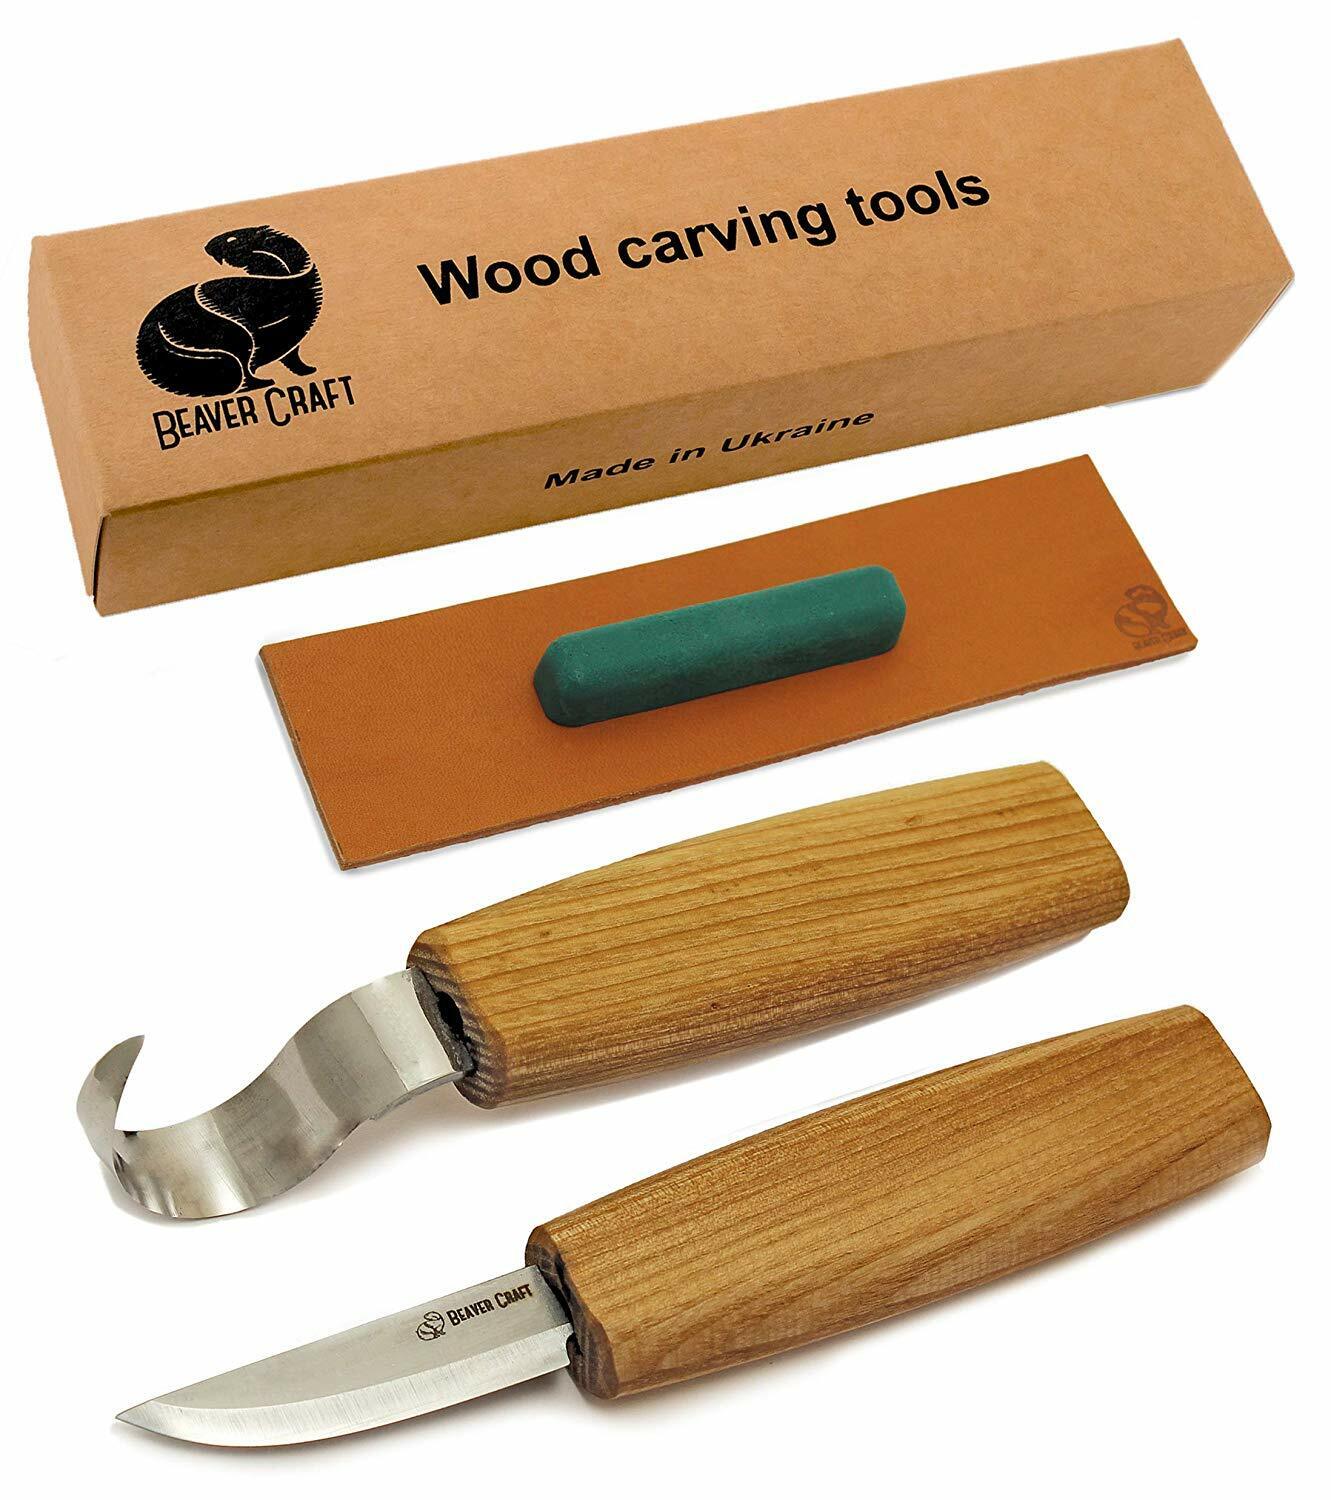 Spoon Carving Knives Woodcarving Set Hook Knife Whittling BeaverCraft OFFICIAL